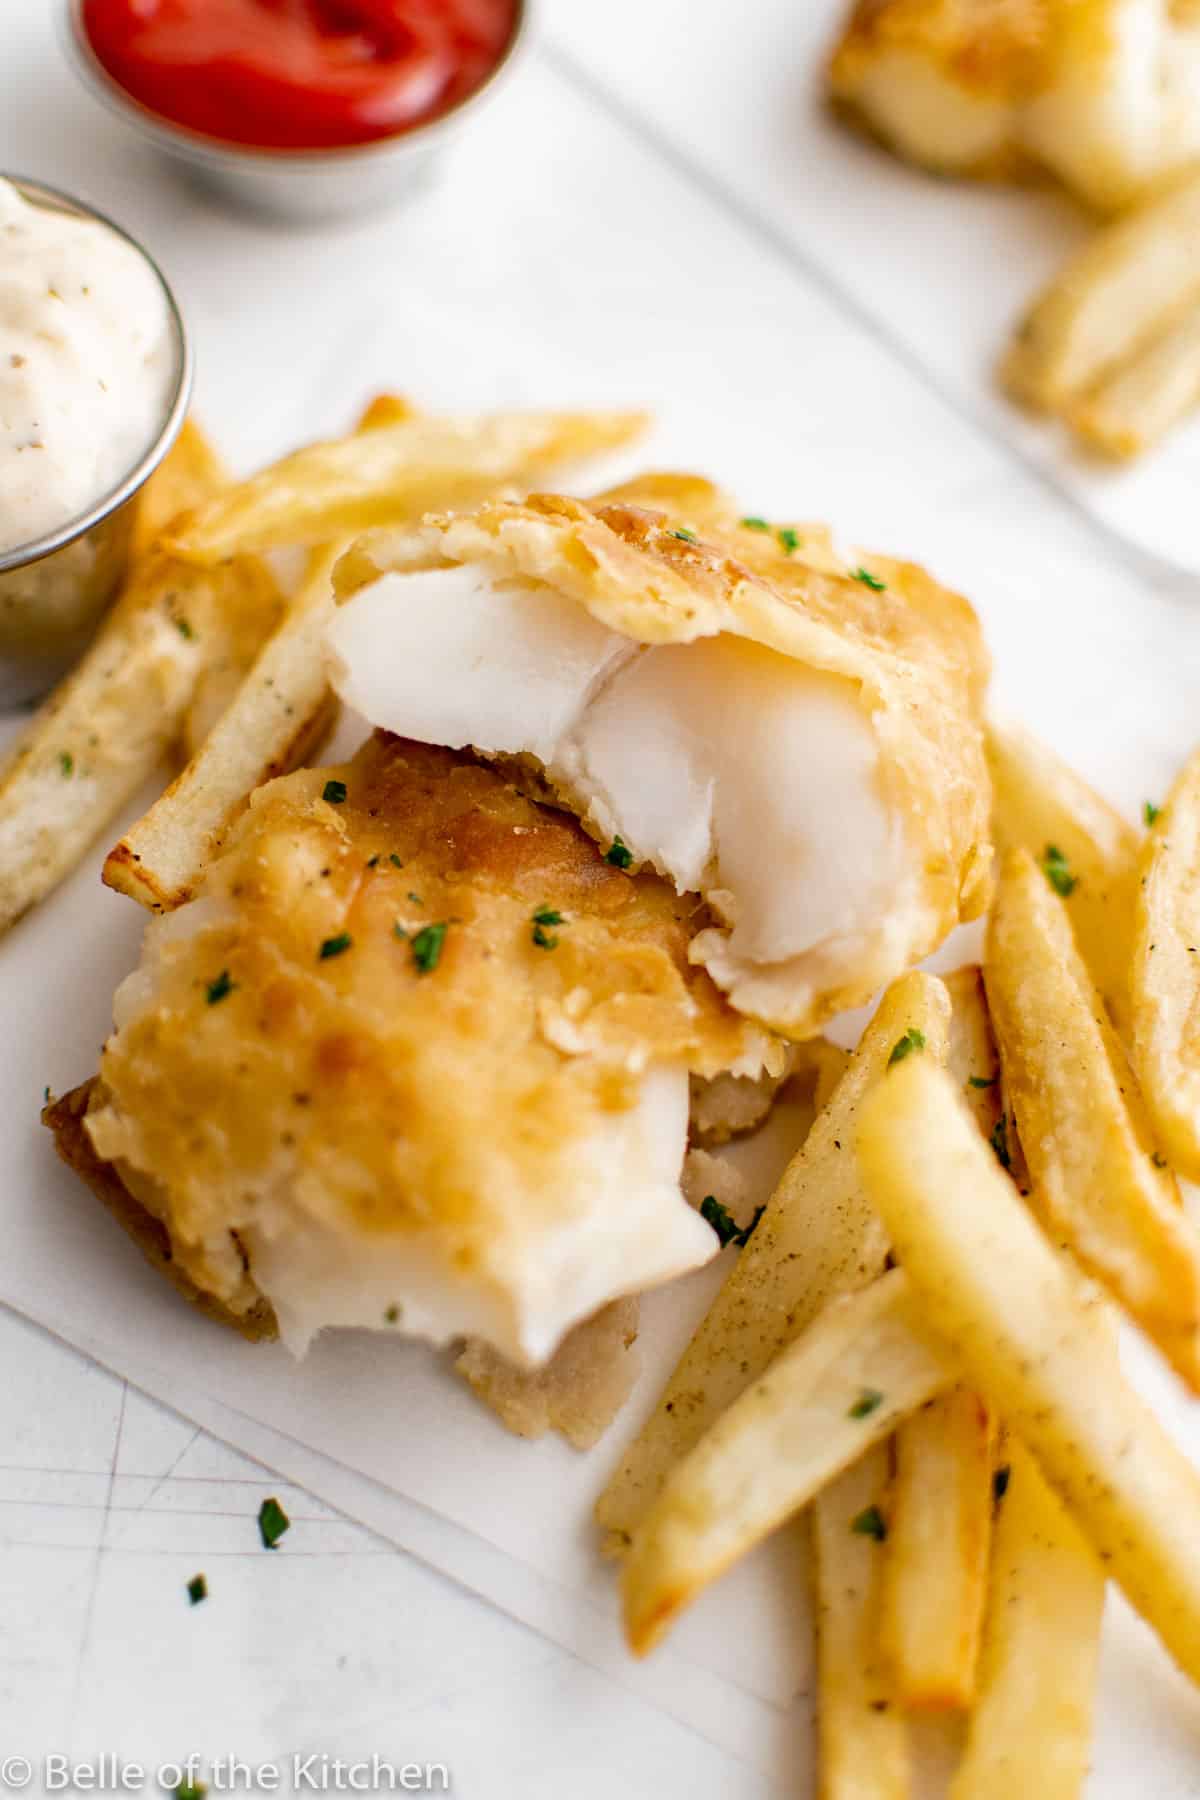 fried fish next to French fries